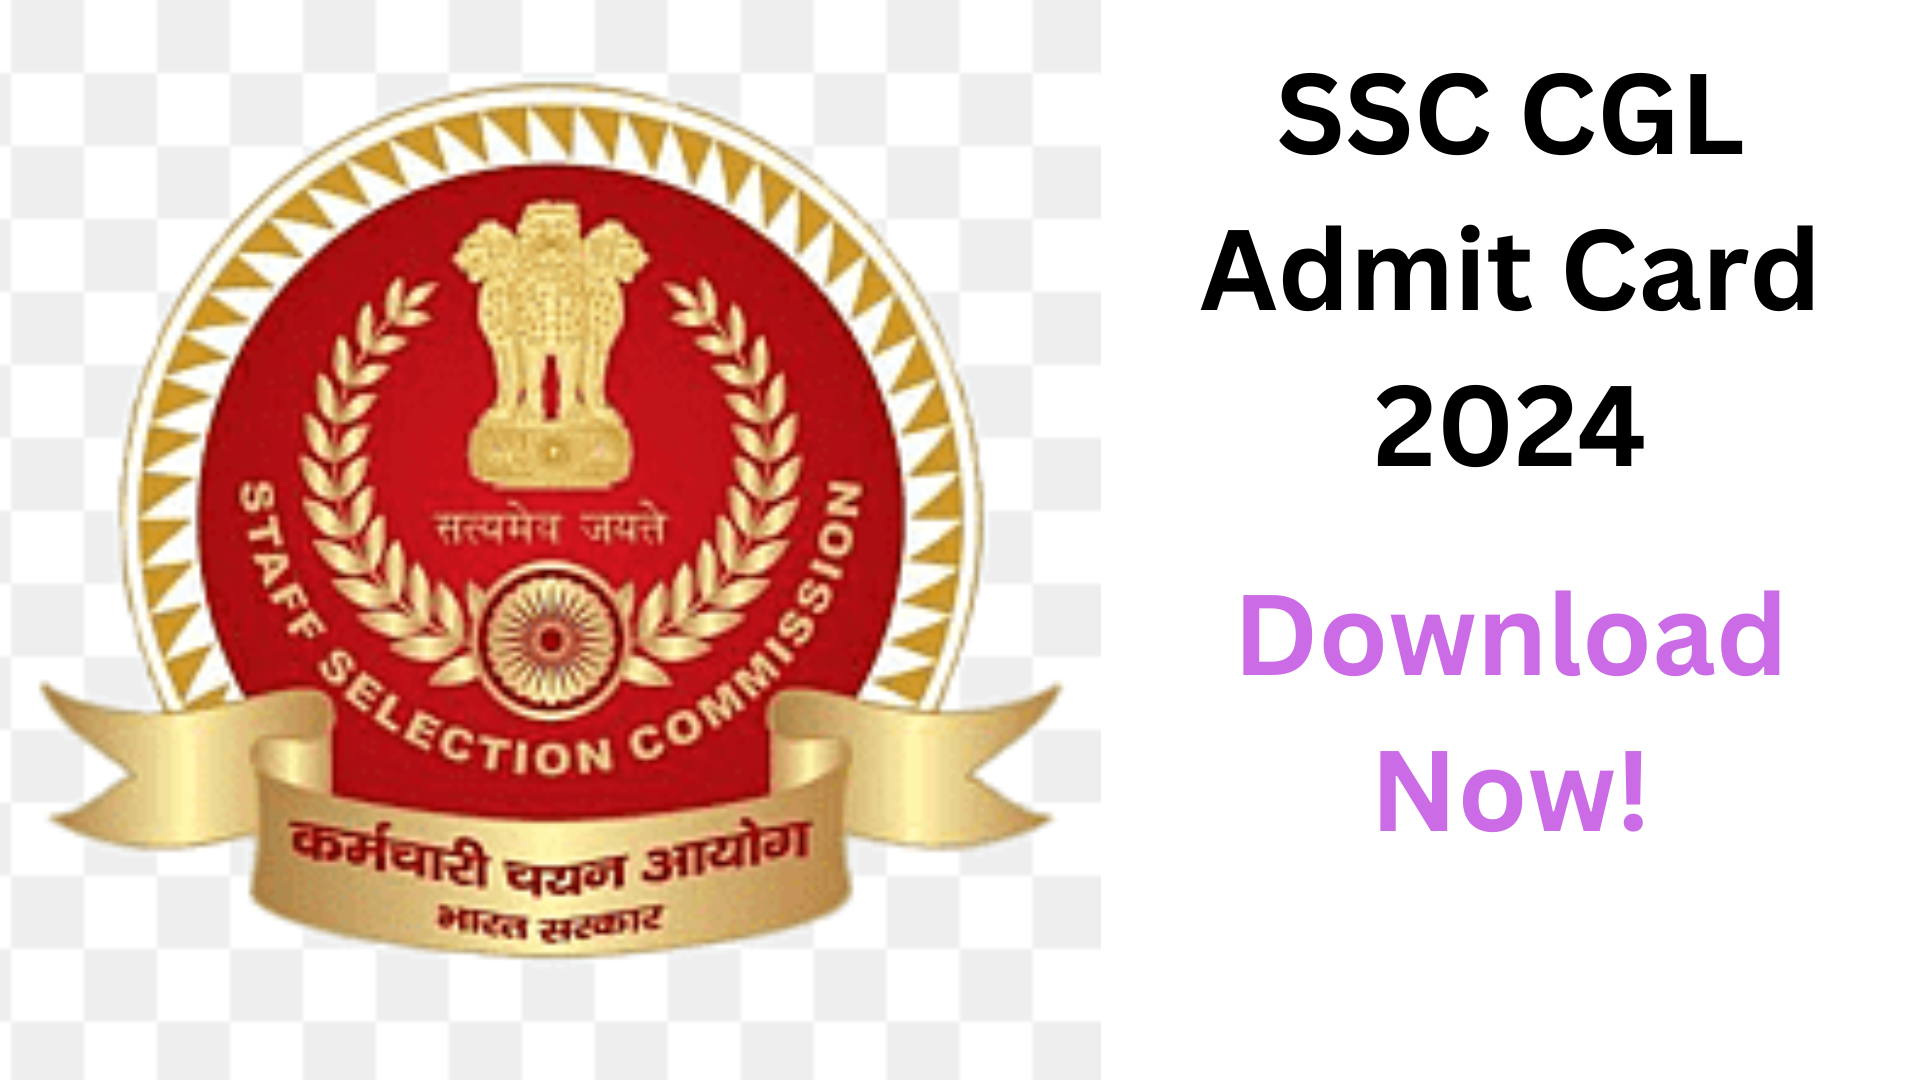 Download SSC CGL Admit Card 2024 Now, Check Other Details, and More